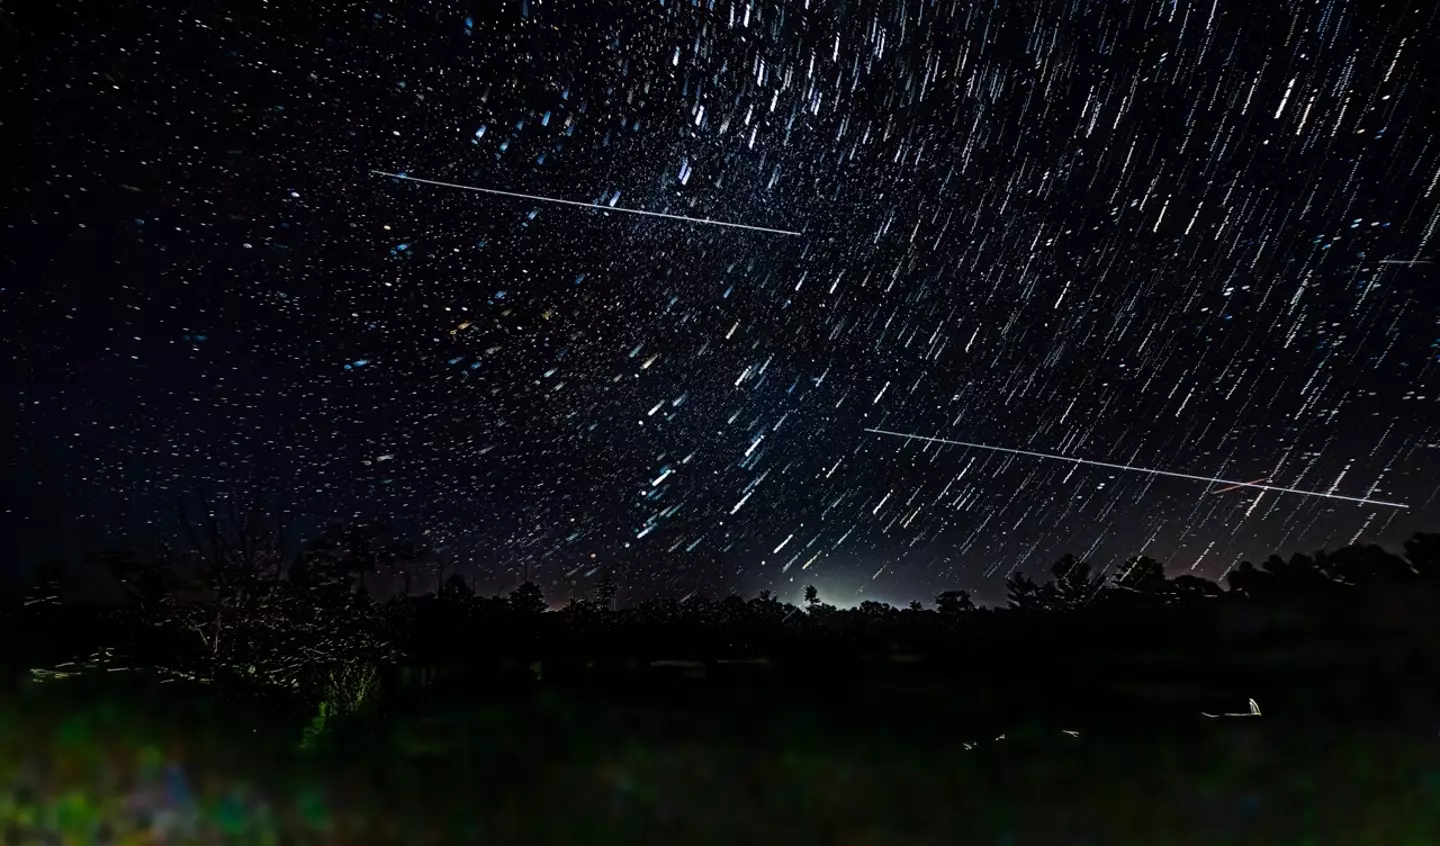 The meteor shower, also known as the Giacobinids, takes place every year and is one of the two showers that light up the skies in October.